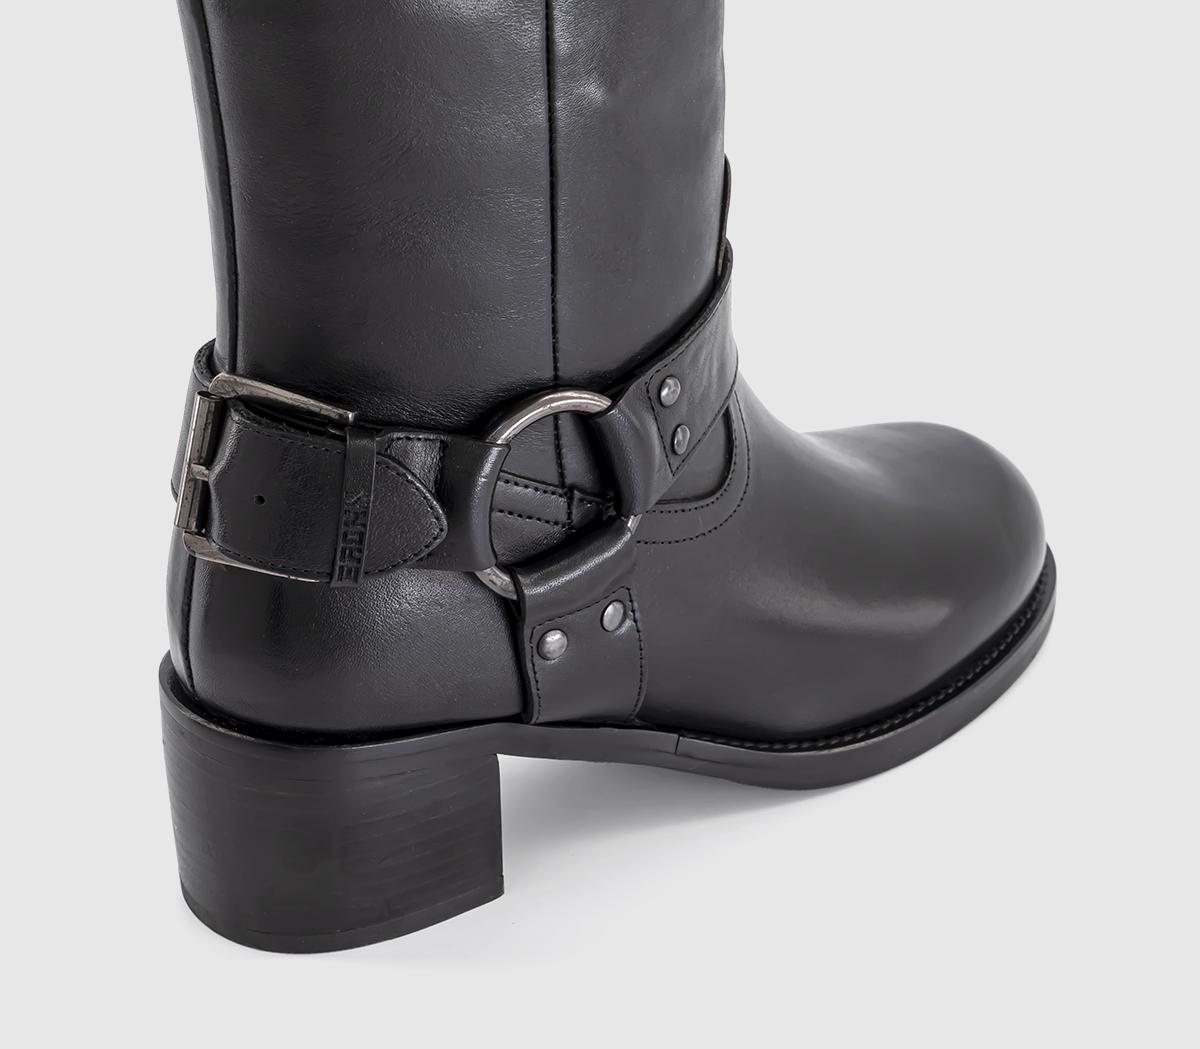 BRONX Camperos Harness Knee High Boots Black - Knee High Boots